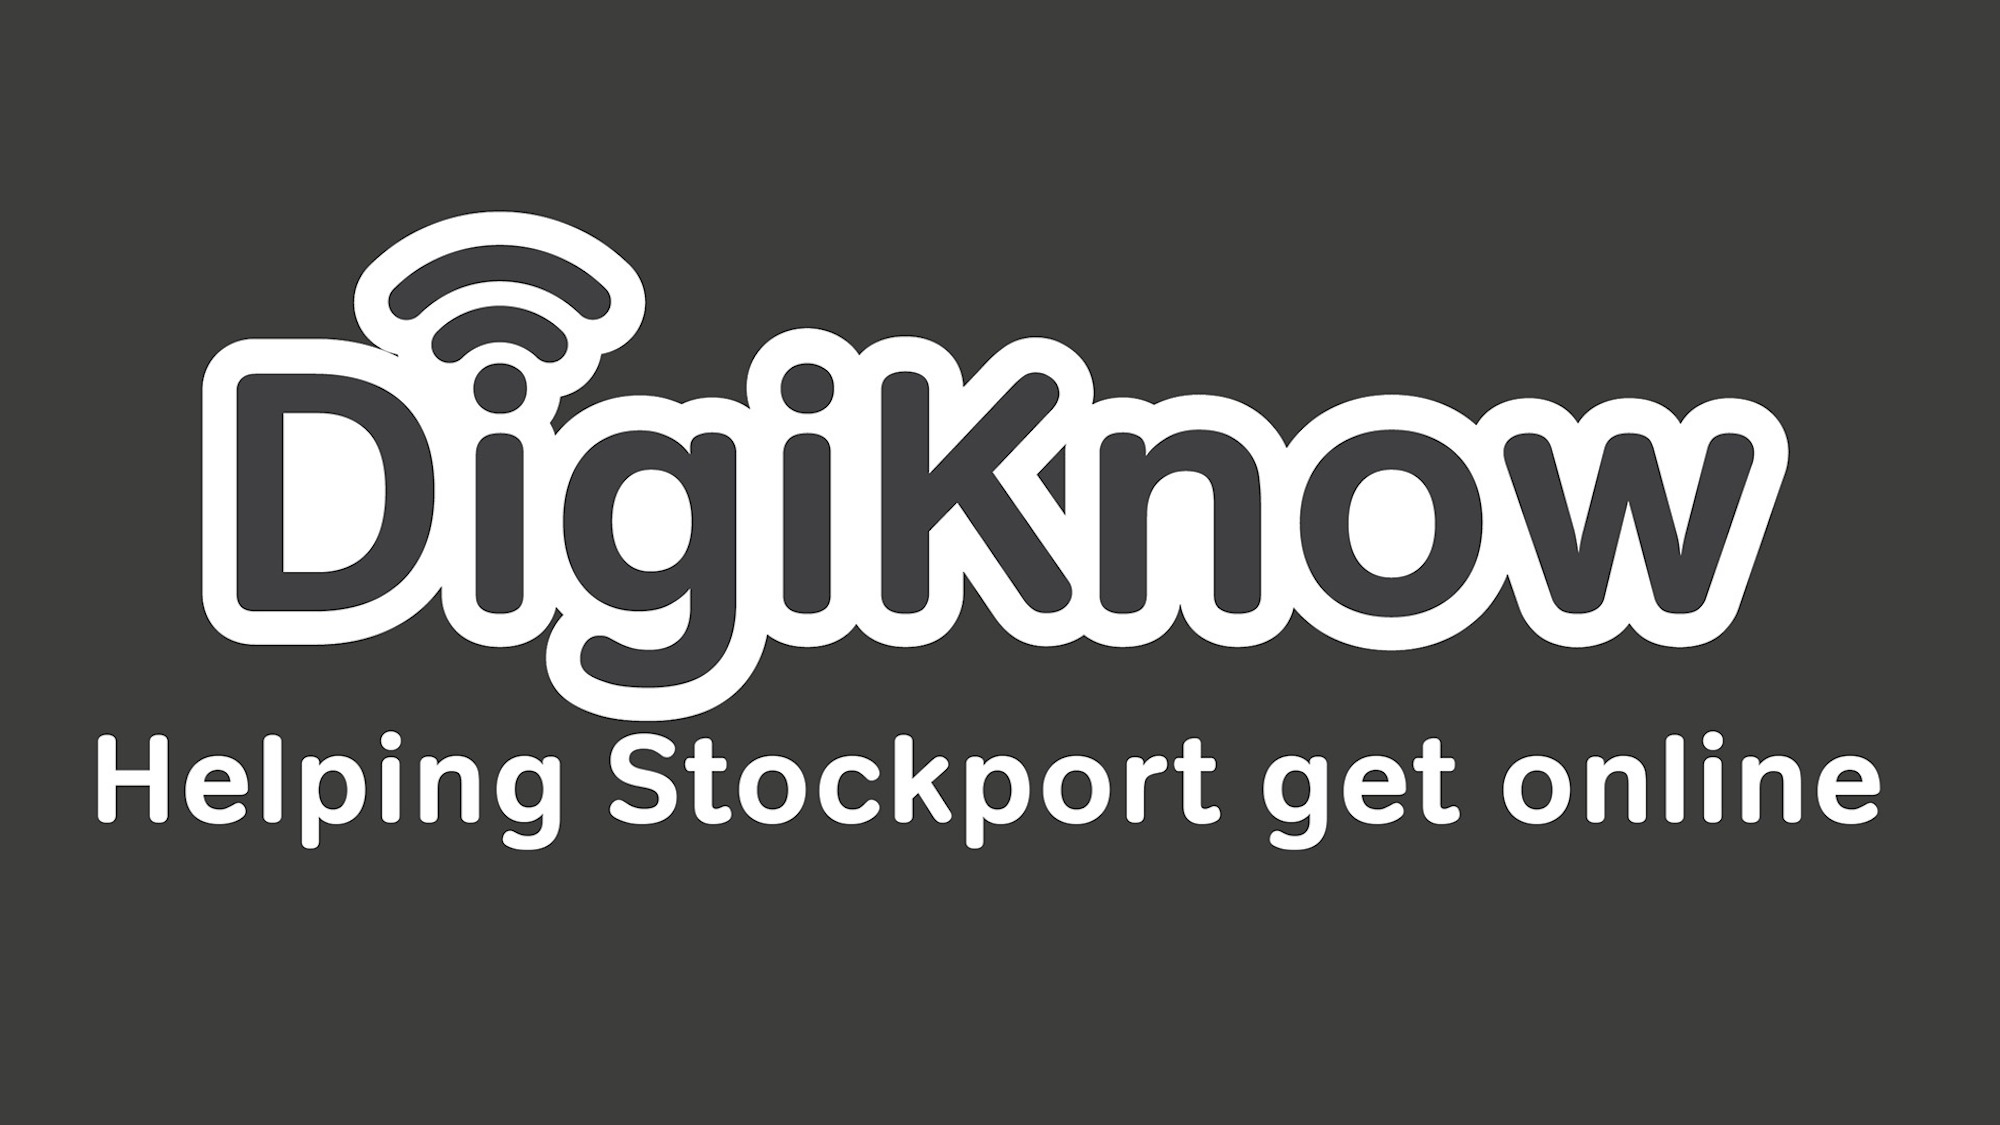 Did you know Stockport libraries can help you get online?